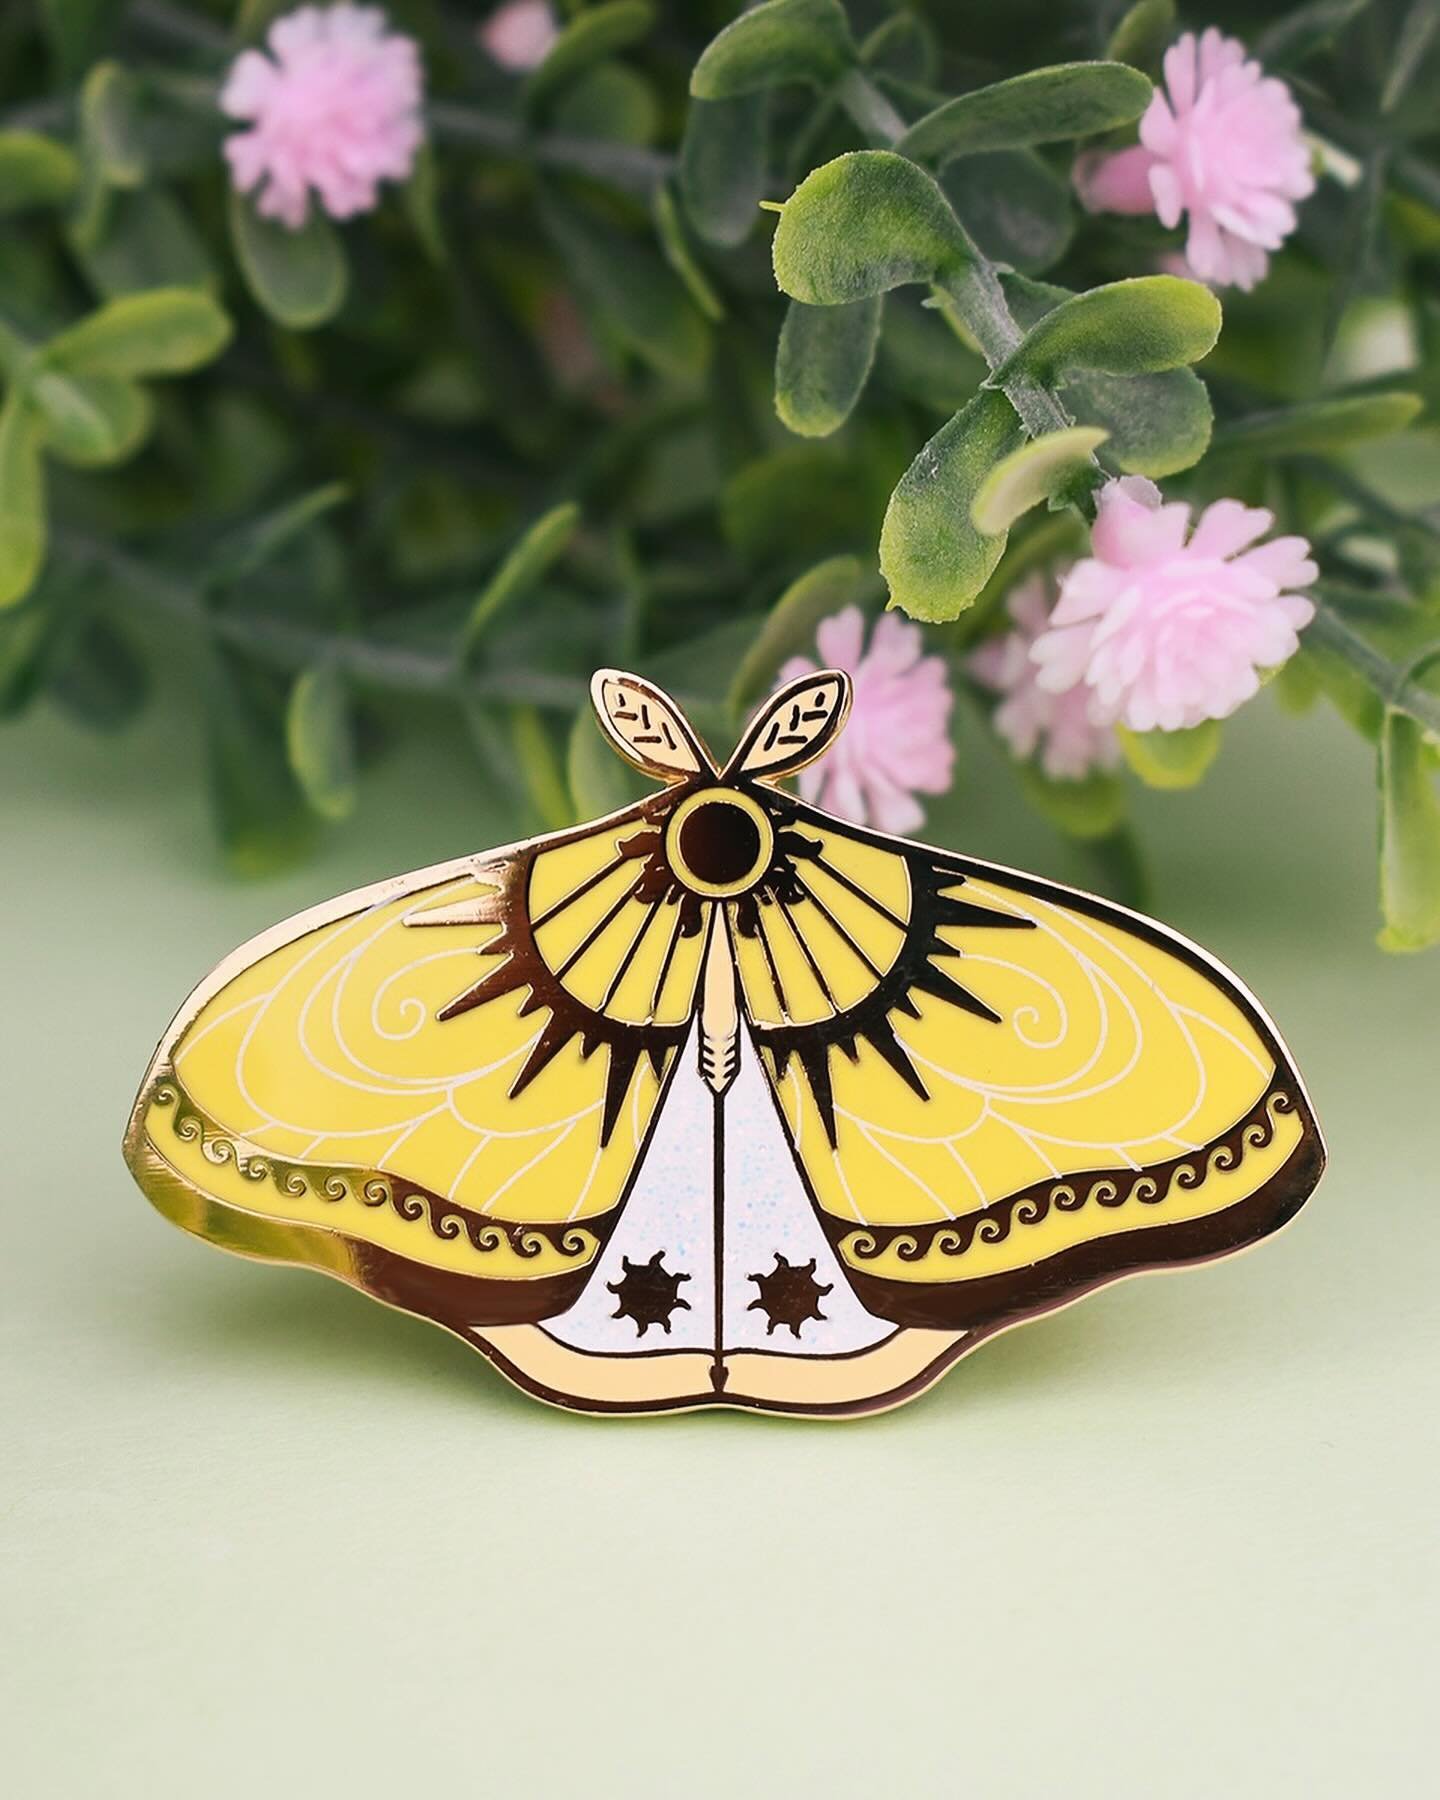 ☀️The Apollo Moth☀️

Anytime I do anything with Apollo I&rsquo;m pleasantly surprised by how popular he is 💕💕

With this one, I wish the screenprinted lines had come out thicker. But some people might prefer how delicate the wings are~!

#apollogod